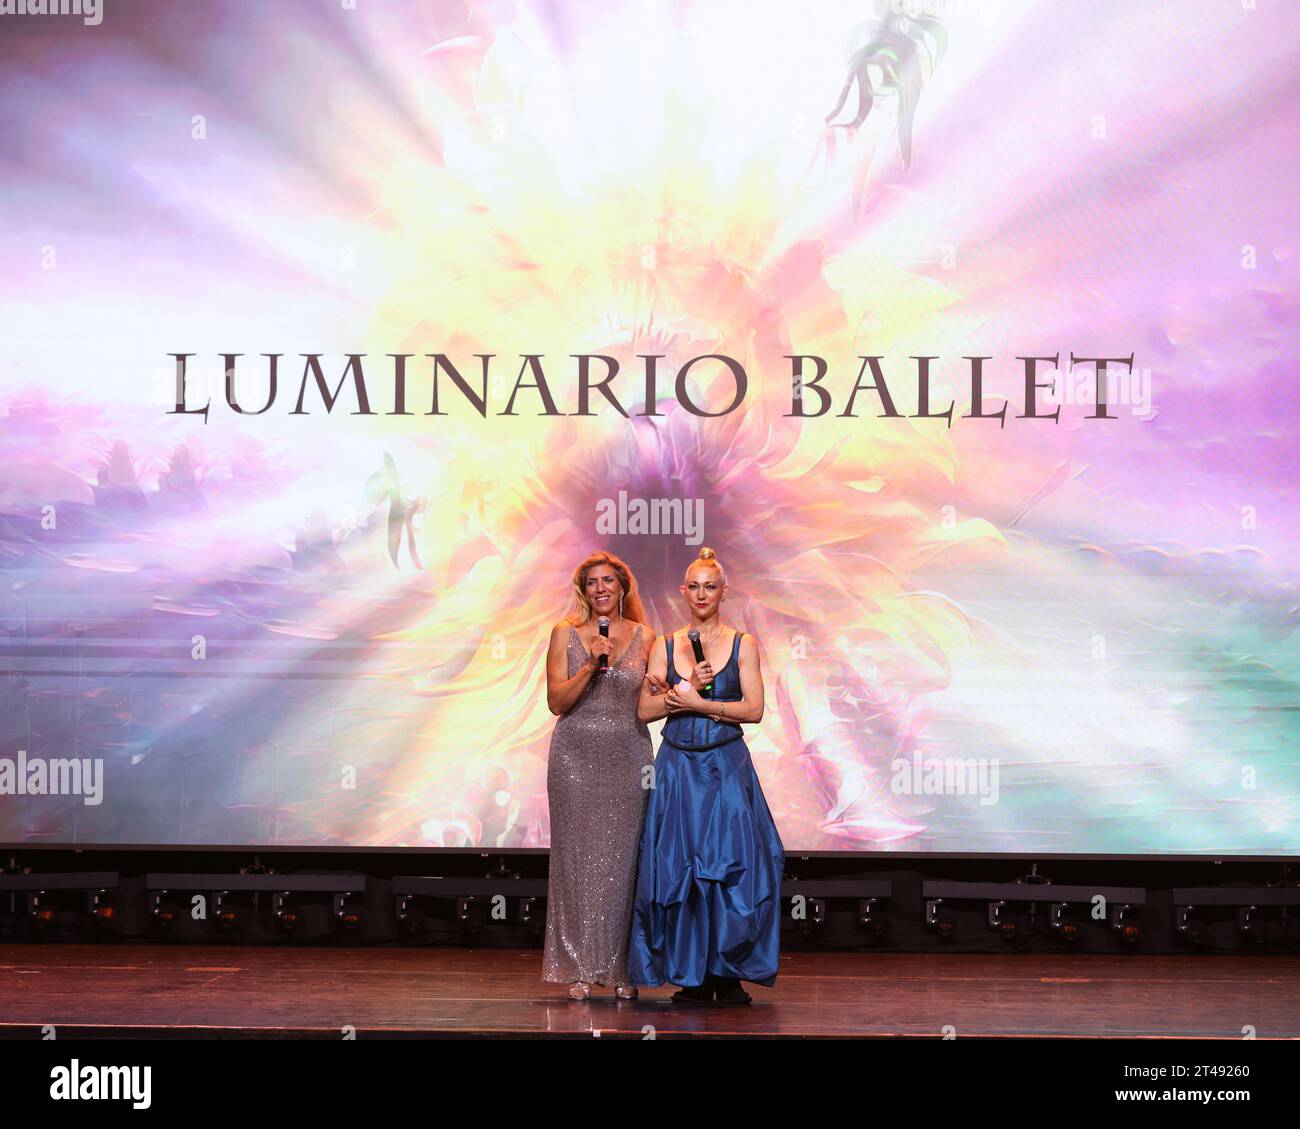 Hollywood, California, USA. 22nd October, 2023, Judith FLEX Helle, Director of Luminario Ballet and Bianca Sapetto, founding member of the Luminario Ballet, onstage at the Luminario Ballet's 'Lucky 13 Season' gala fundraiser and performance - ZARATHUSTRA! at the Avalon Hollywood in Hollywood, California. Luminario Ballet of Los Angeles is an award-winning repertory ballet and aerial dance company reflecting the vibrancy, diversity, and global relevance of Southern California dance.  Credit: Sheri Determan Stock Photo